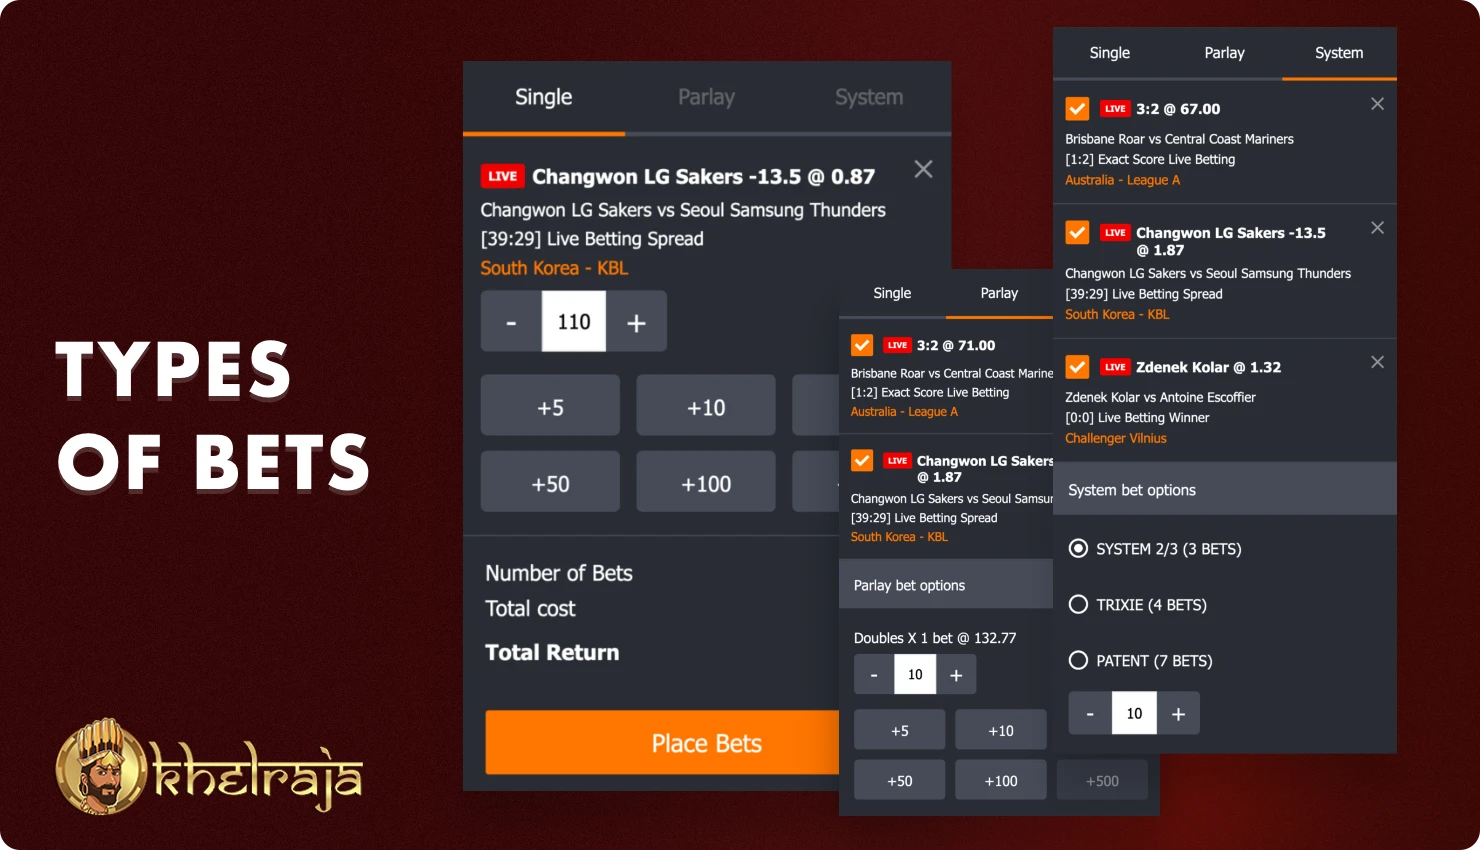 On the Khelraja platform players from India have different types of bets available